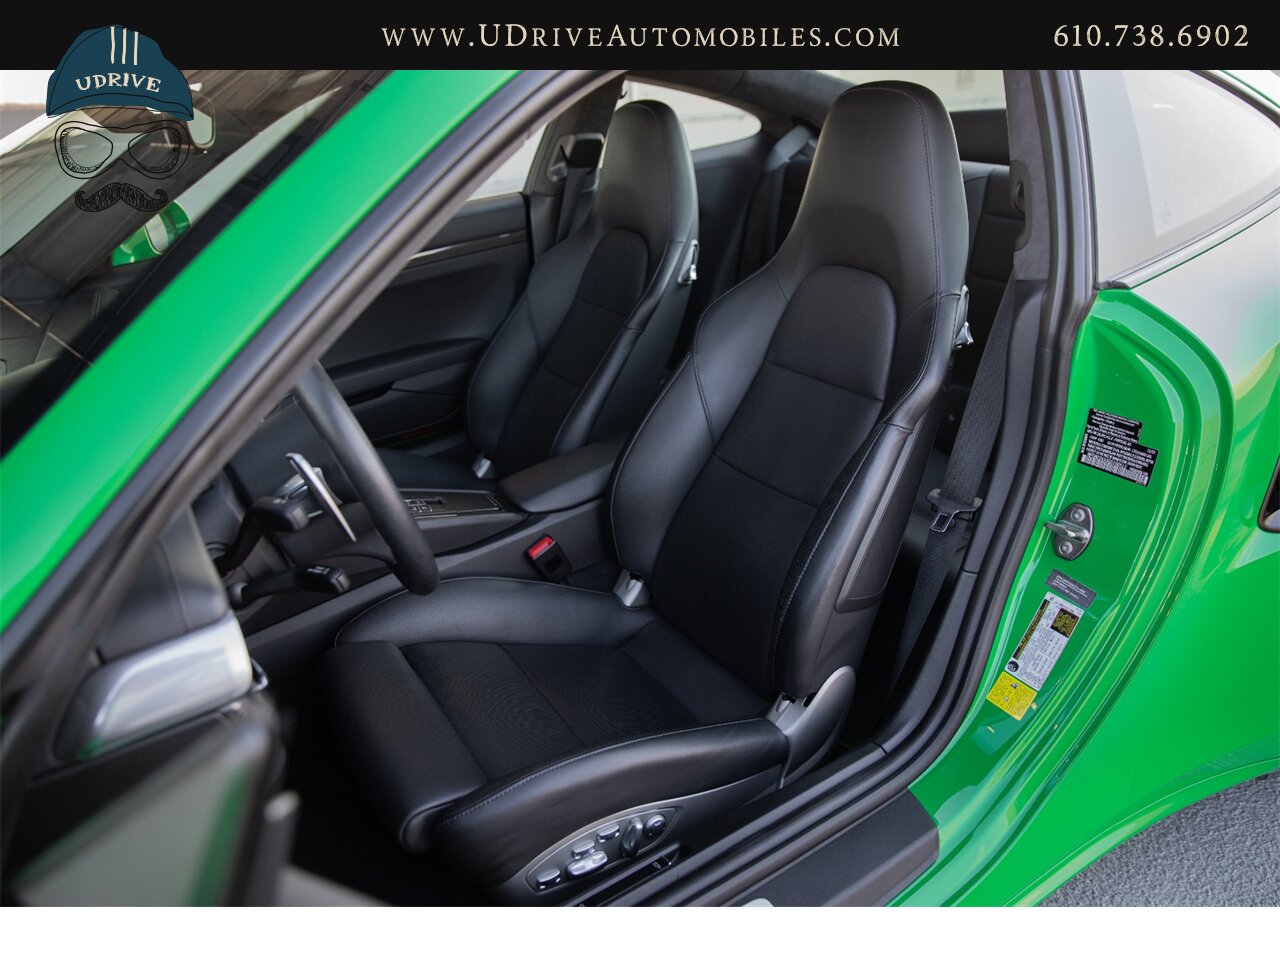 2016 Porsche 911 Turbo S PTS Viper Green Aerokit $203k MSRP  Painted Side Skirts Painted Grilles Wheels in Black - Photo 27 - West Chester, PA 19382